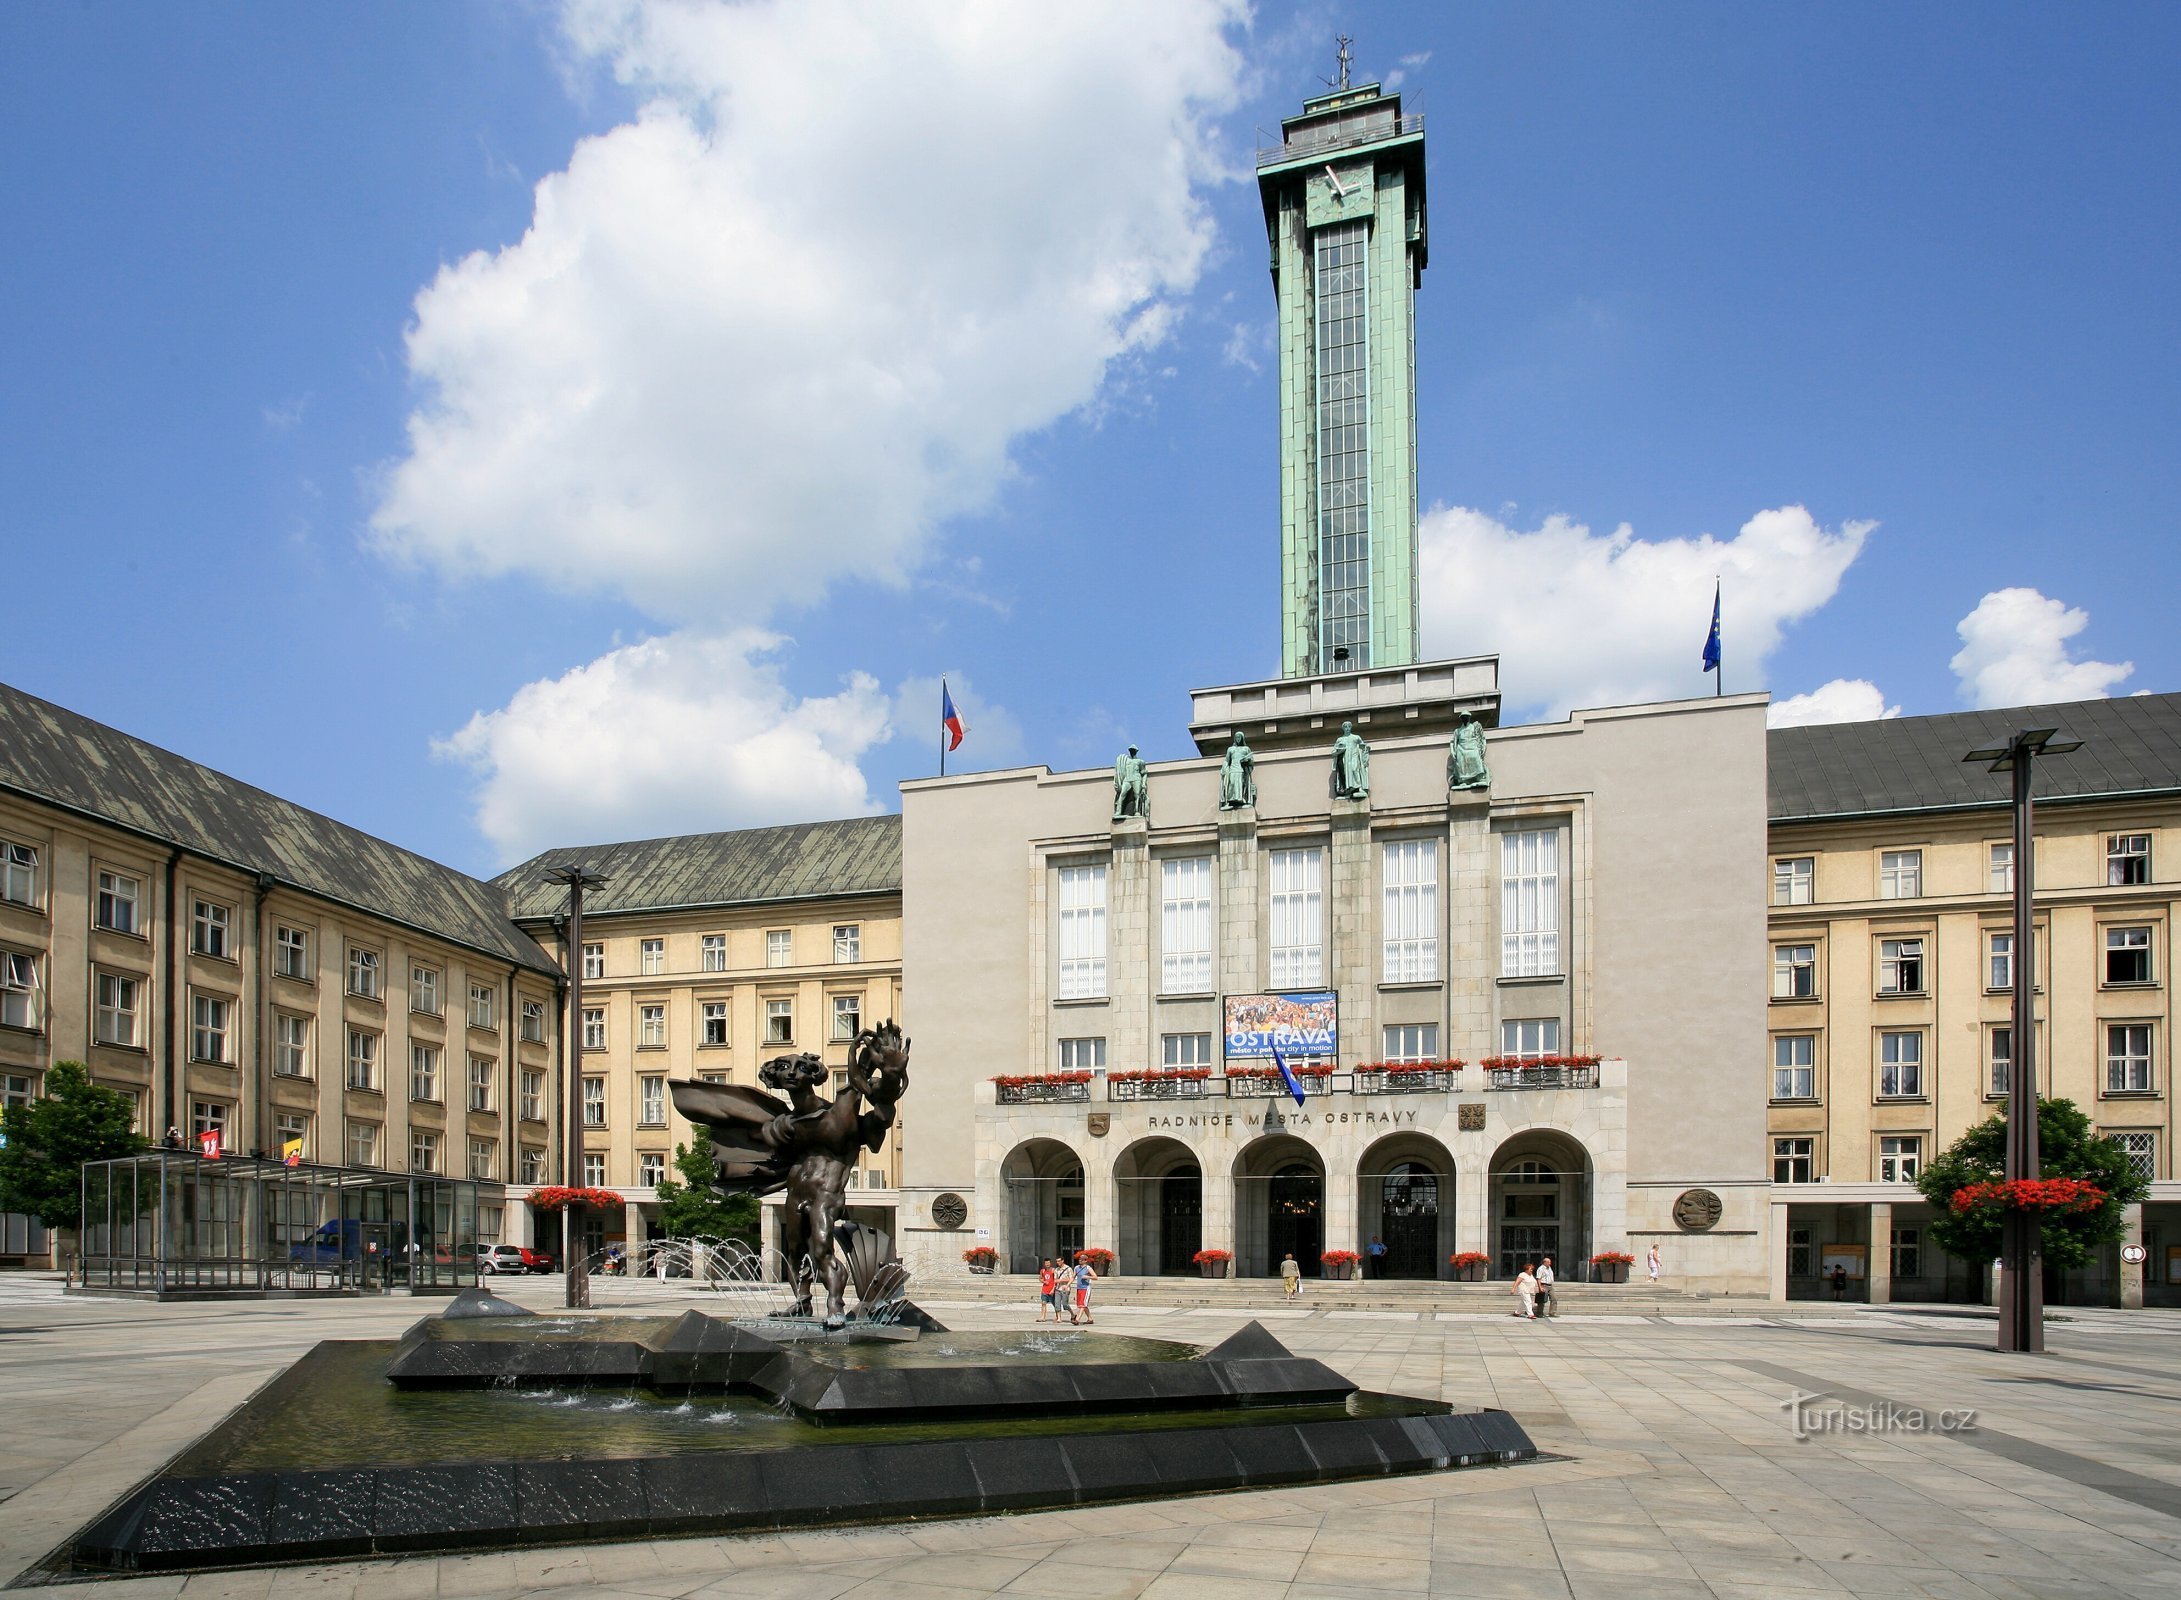 Observation tower of the New Town Hall in Ostrava